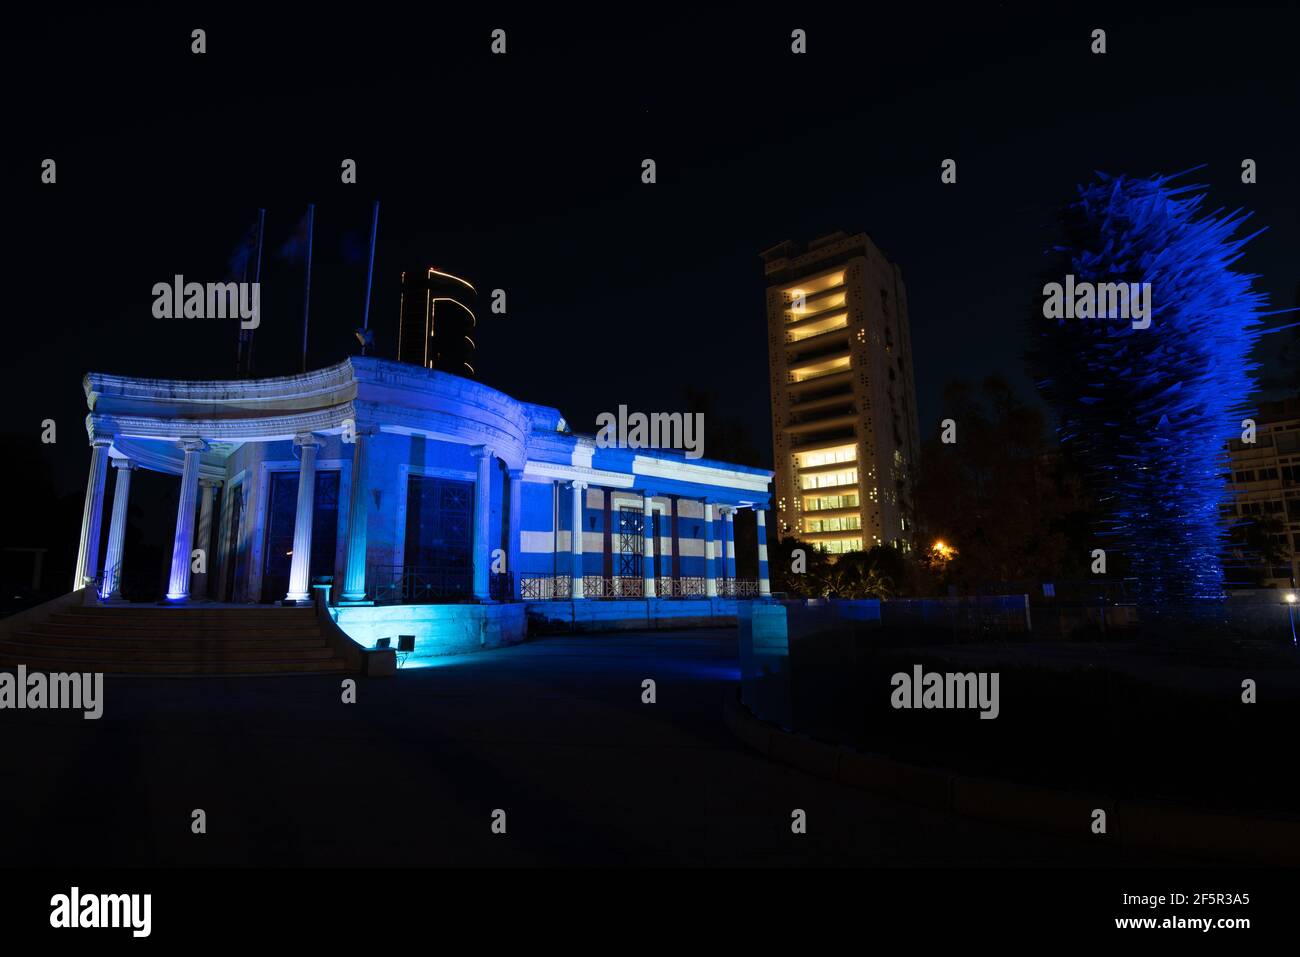 Flag of Greece illuminated in nicosia municipality building during the celebrations of Greek independence day Stock Photo